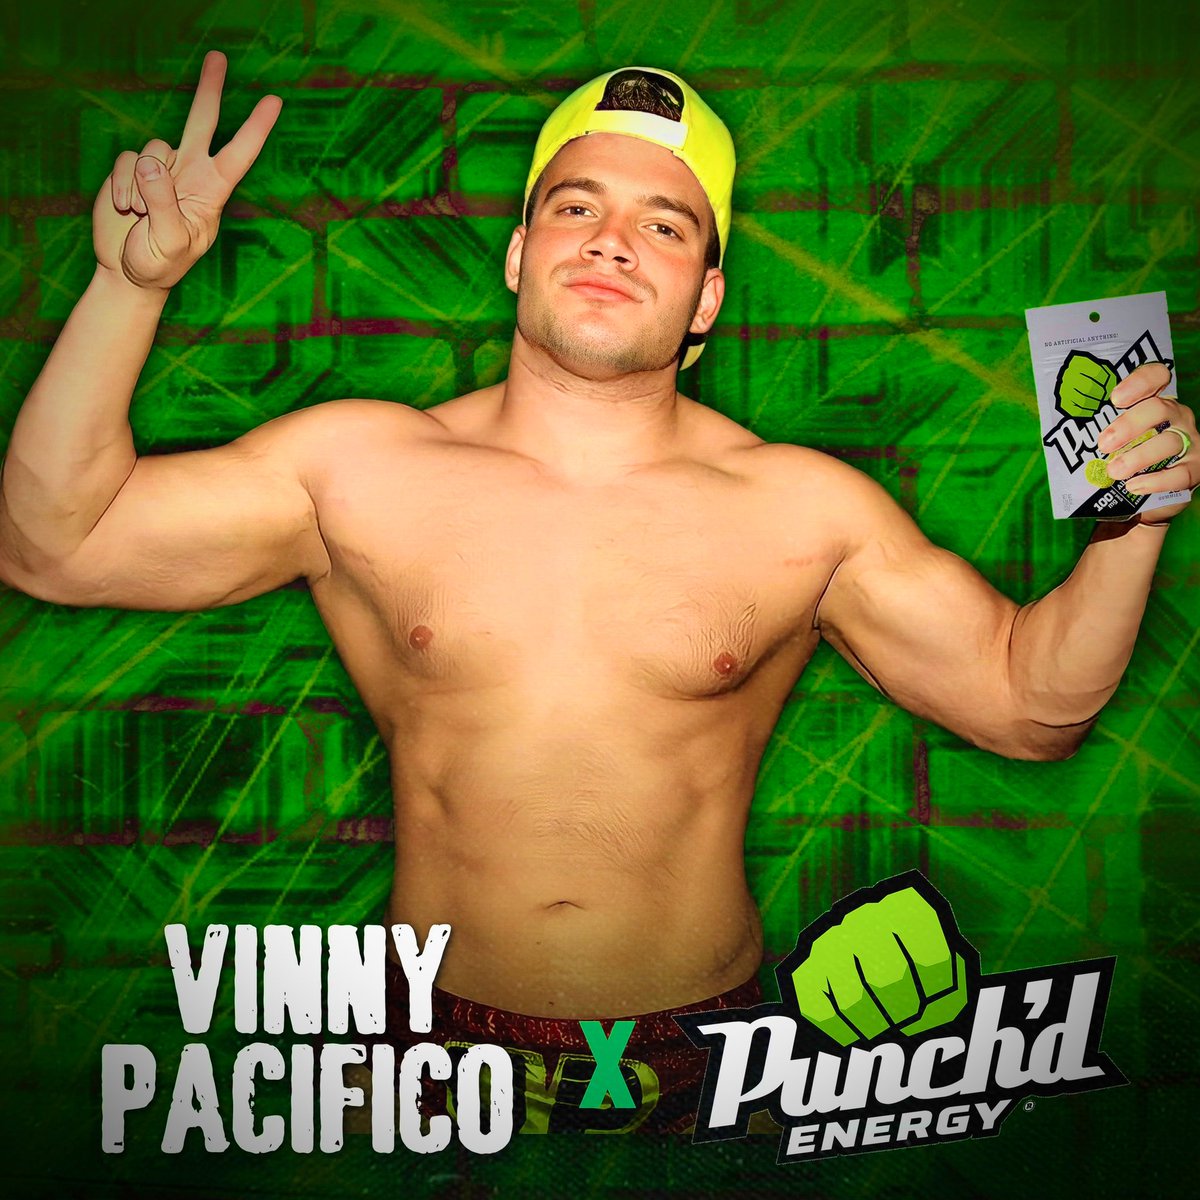 💥OFFICIAL ANNOUNCEMENT💥

Vinny Pacifico has now partnered and with Punch’d Energy👊

Bringing energy in GUMMY form! 

Get your Power Punch in every bite👊